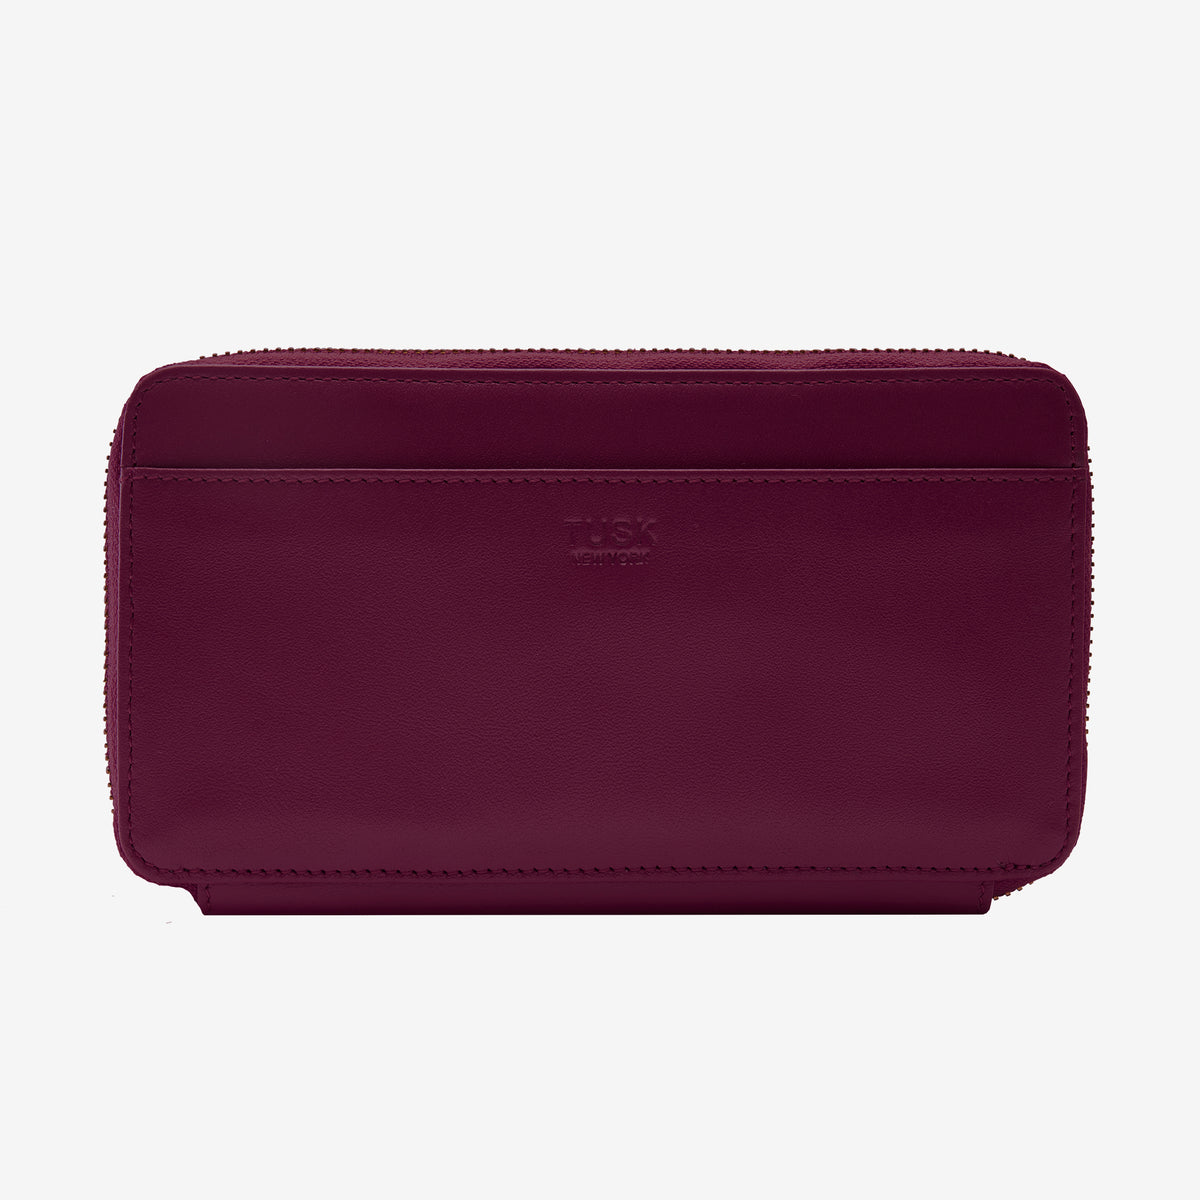 tusk-443-double-zip-leather-wallet-oxblood-front